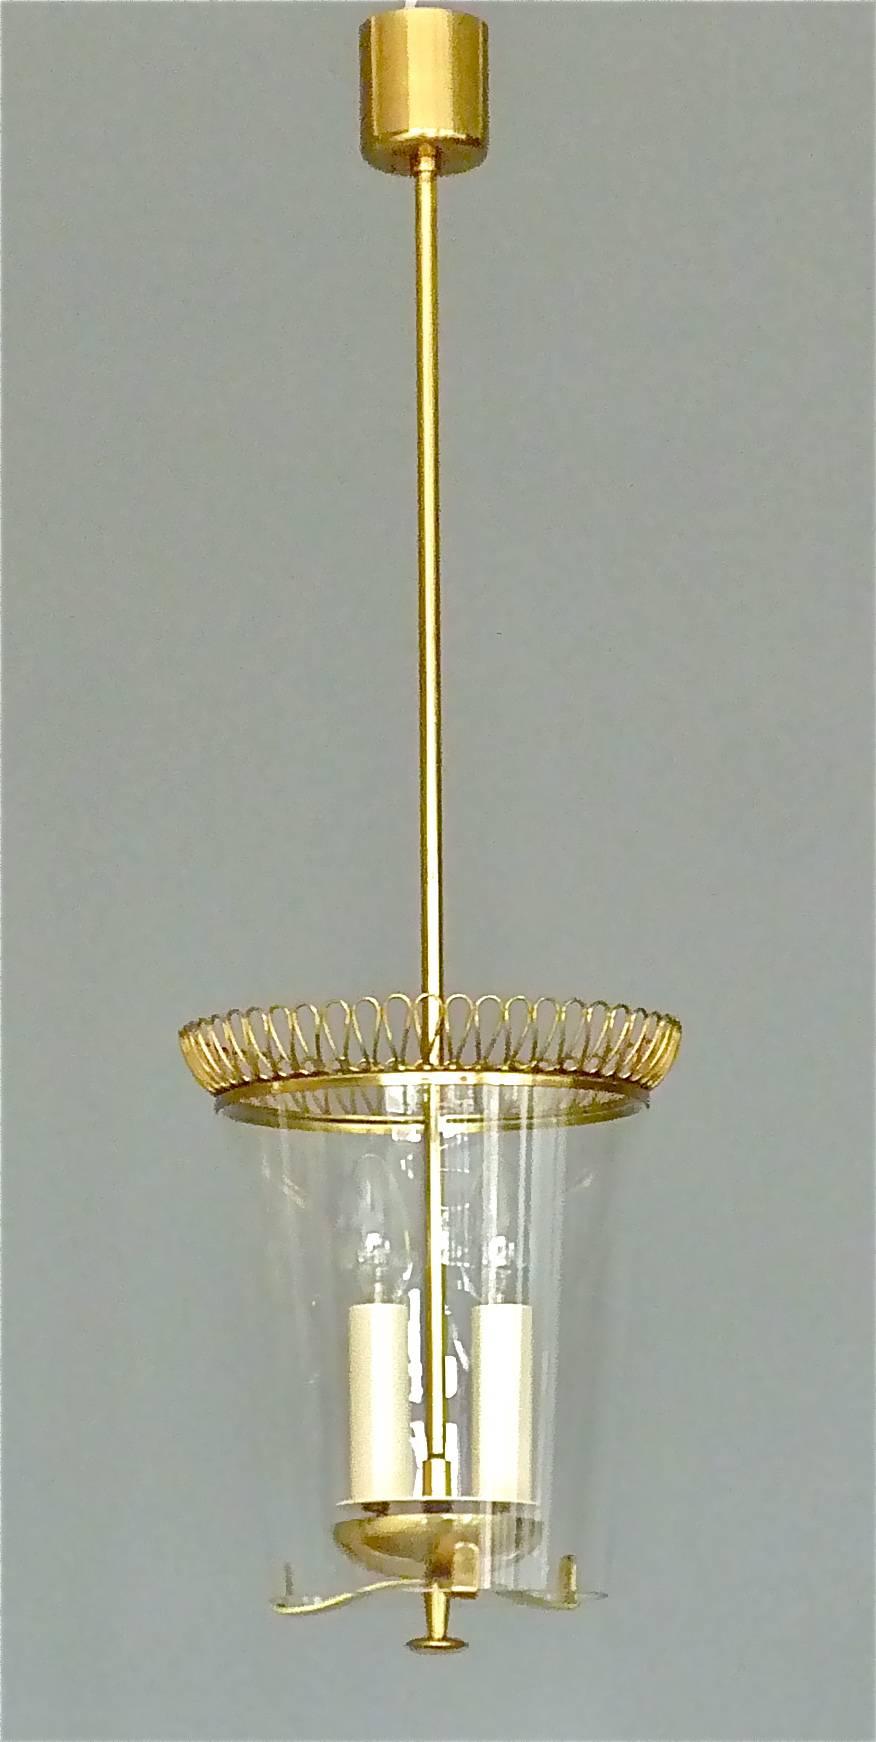 Rare brass and glass two-light midcentury pendant or lantern in the style of Josef Frank, Austria, 1950s. Beautiful patinated brass loop crown decoration to the upper rim of the old and original glass cylinder. The lower rim to glass with two tiny